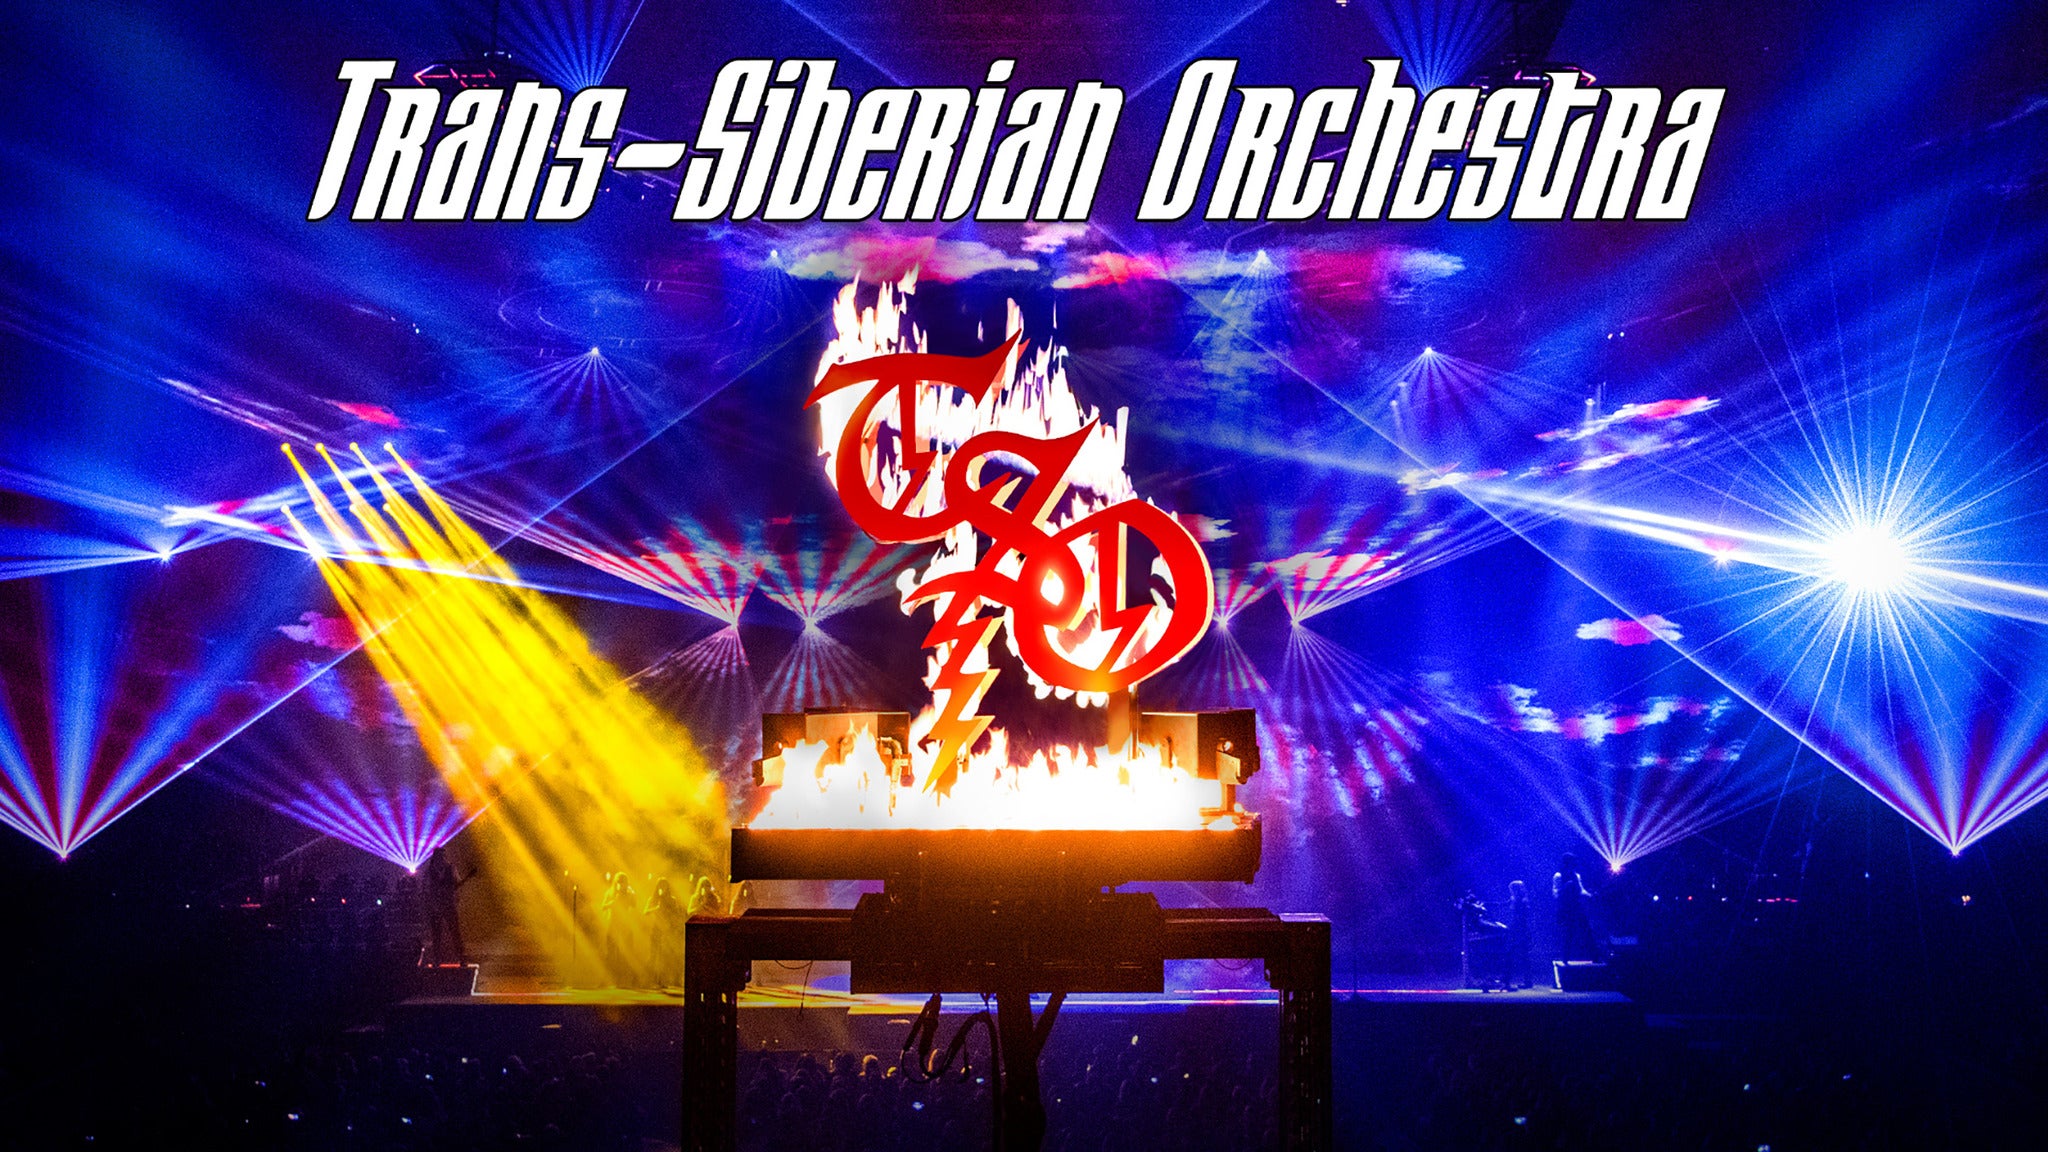 TransSiberian Orchestra Tickets, 2021 Concert Tour Dates Ticketmaster